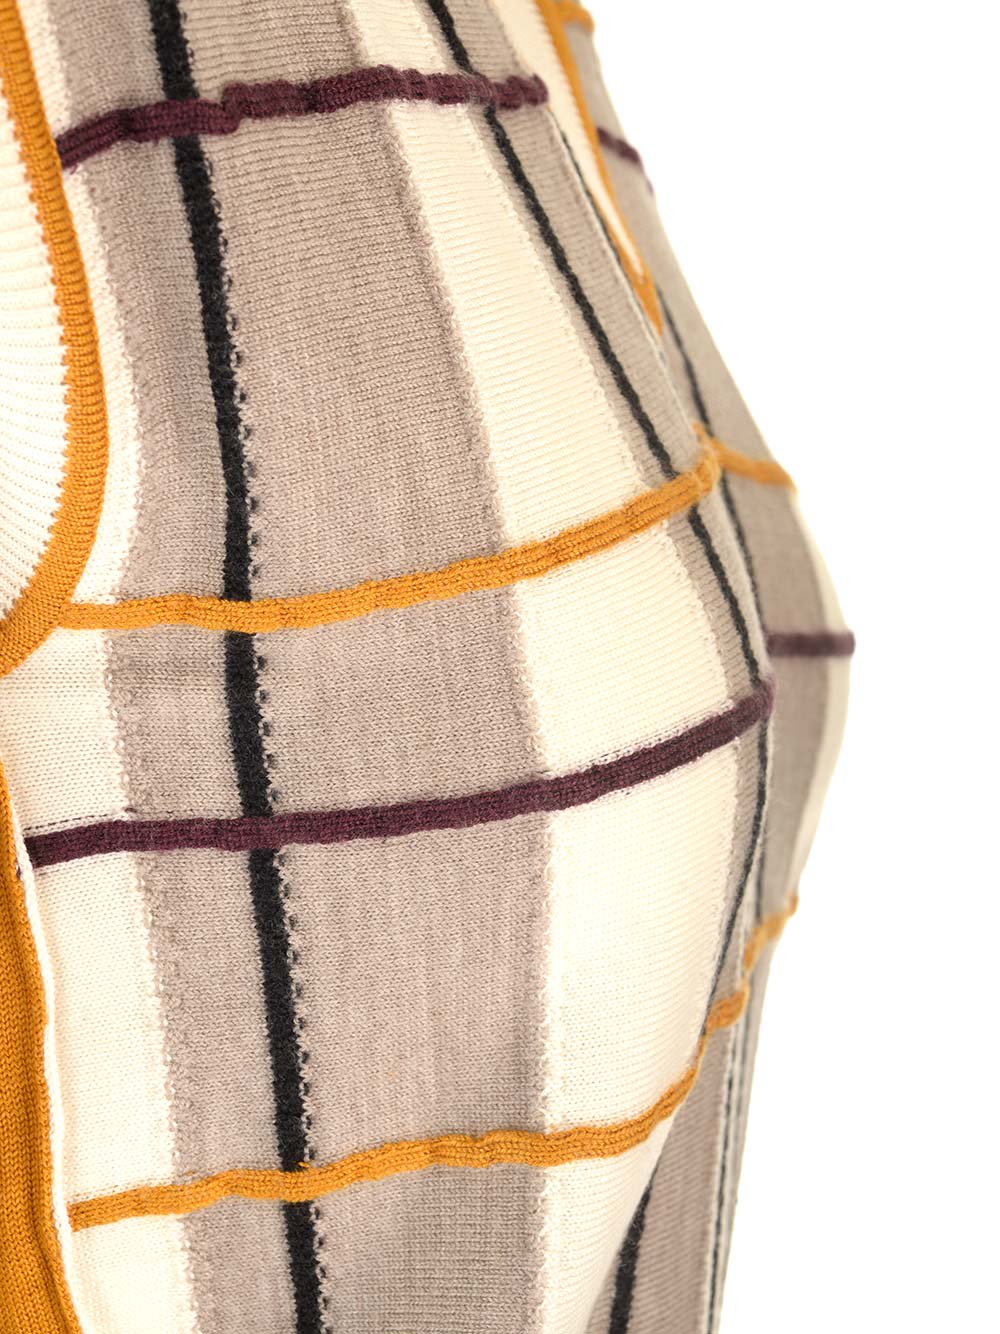 Shop Marni Vest With Checked Patchwork Pattern In Multicolor